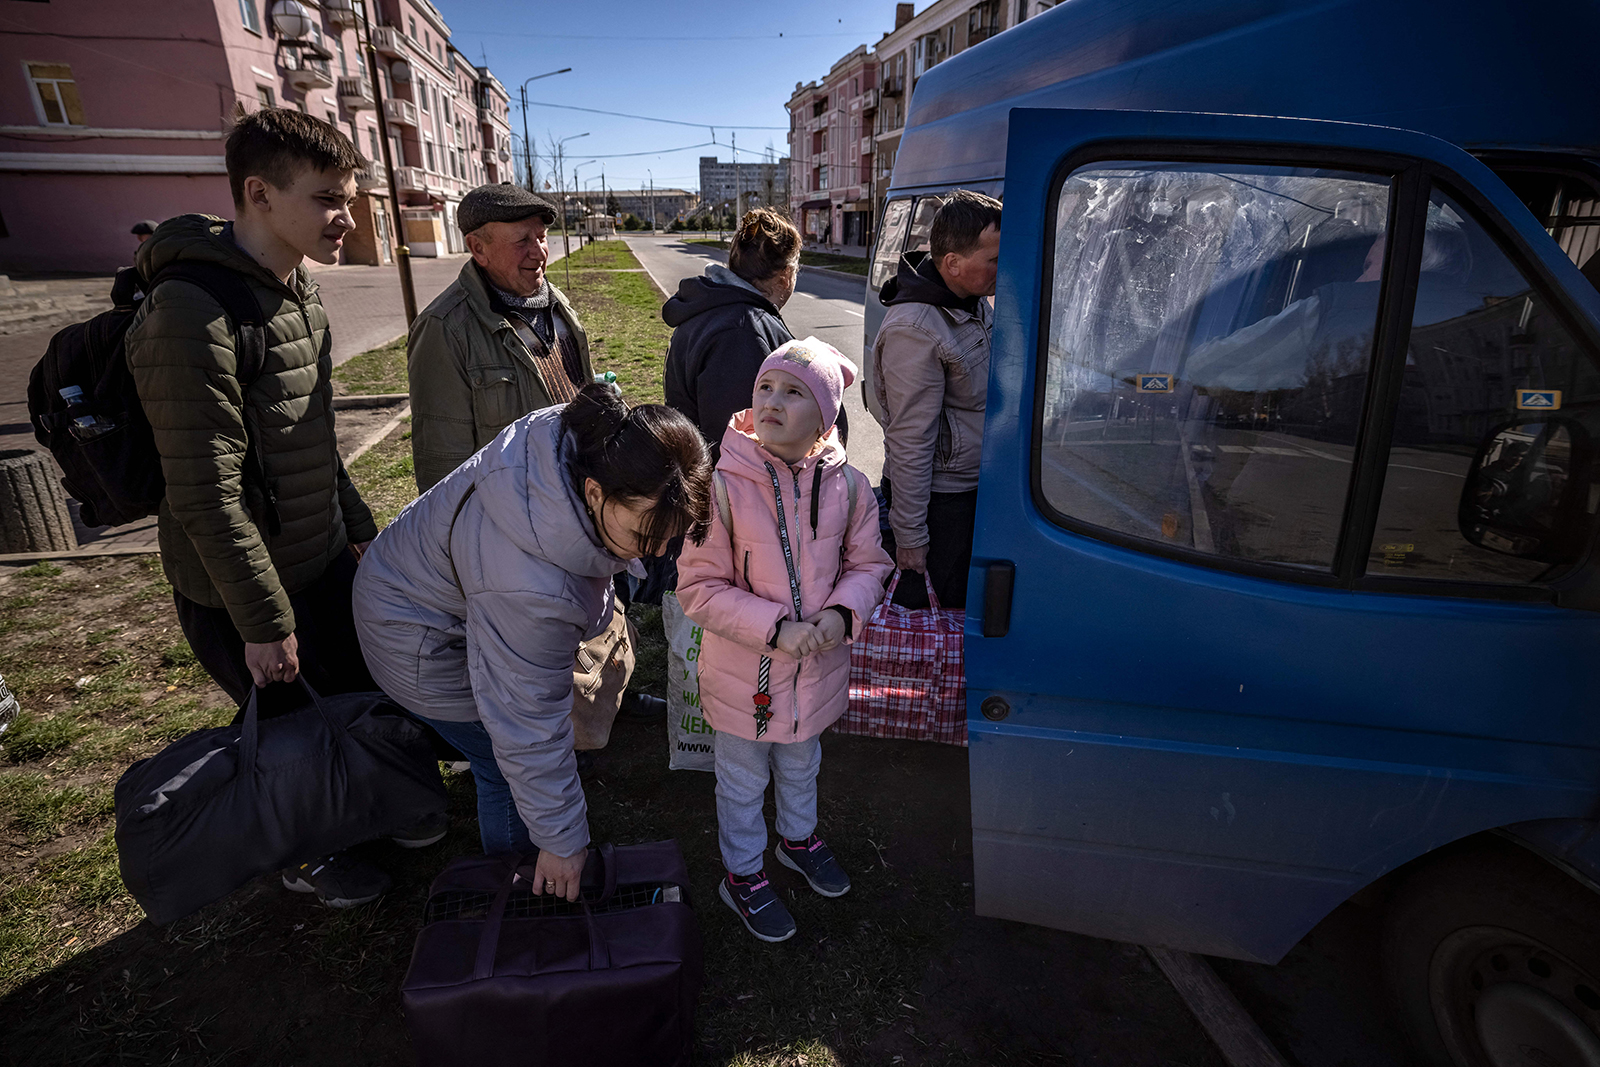 People wait for a bus as a children looks at the sky, a day after a rocket attack at a train station, in Kramatorsk, Ukraine on April 9.